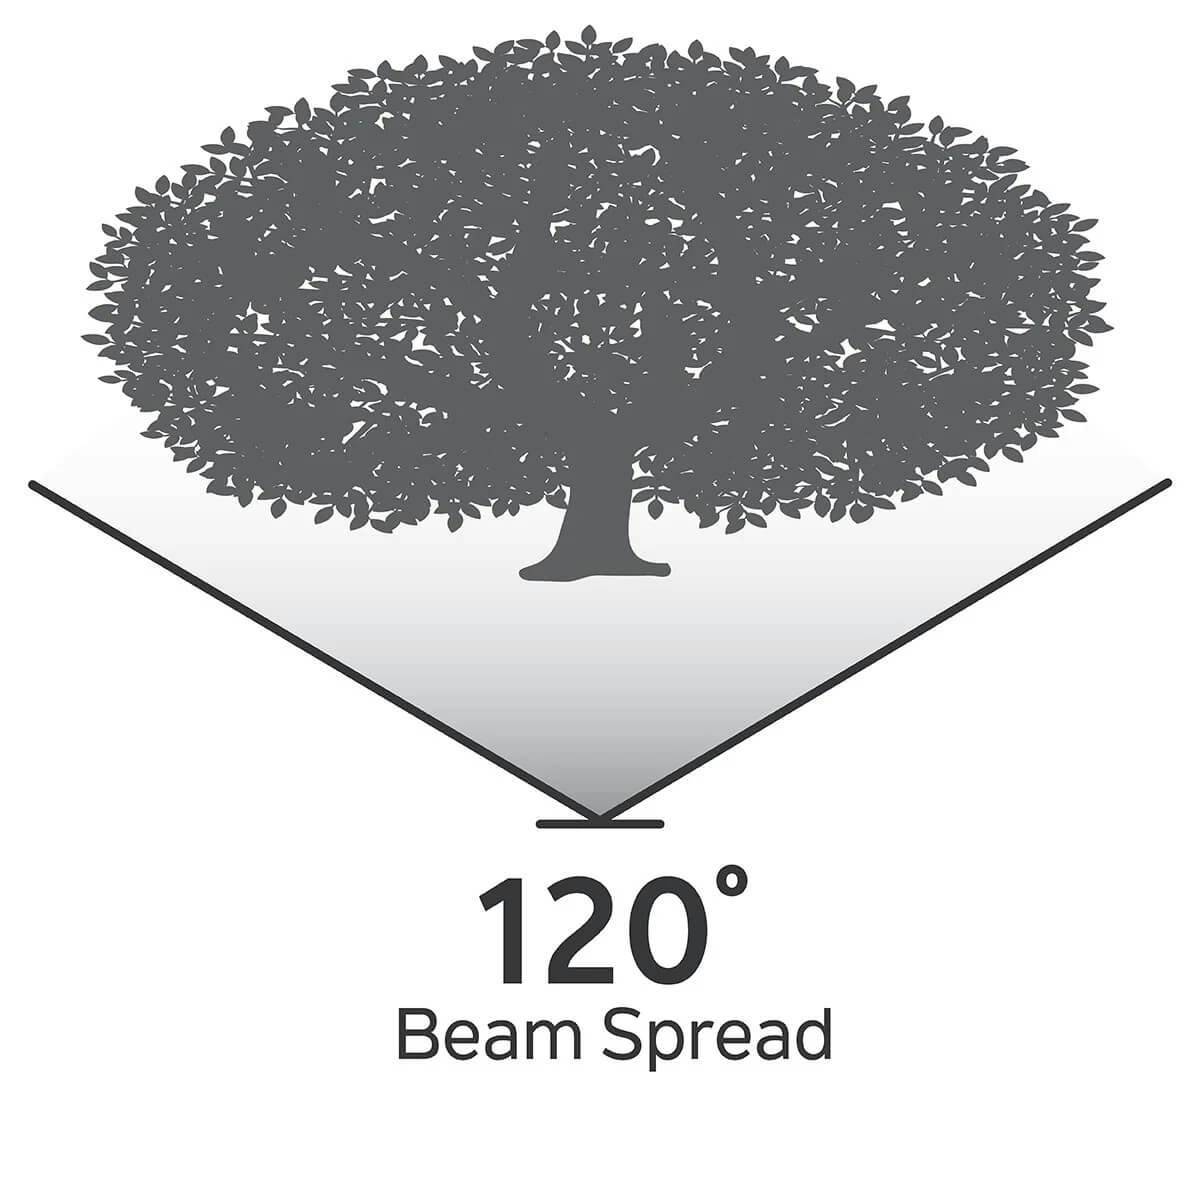 Very large tree illustration with 120 degree beam spread